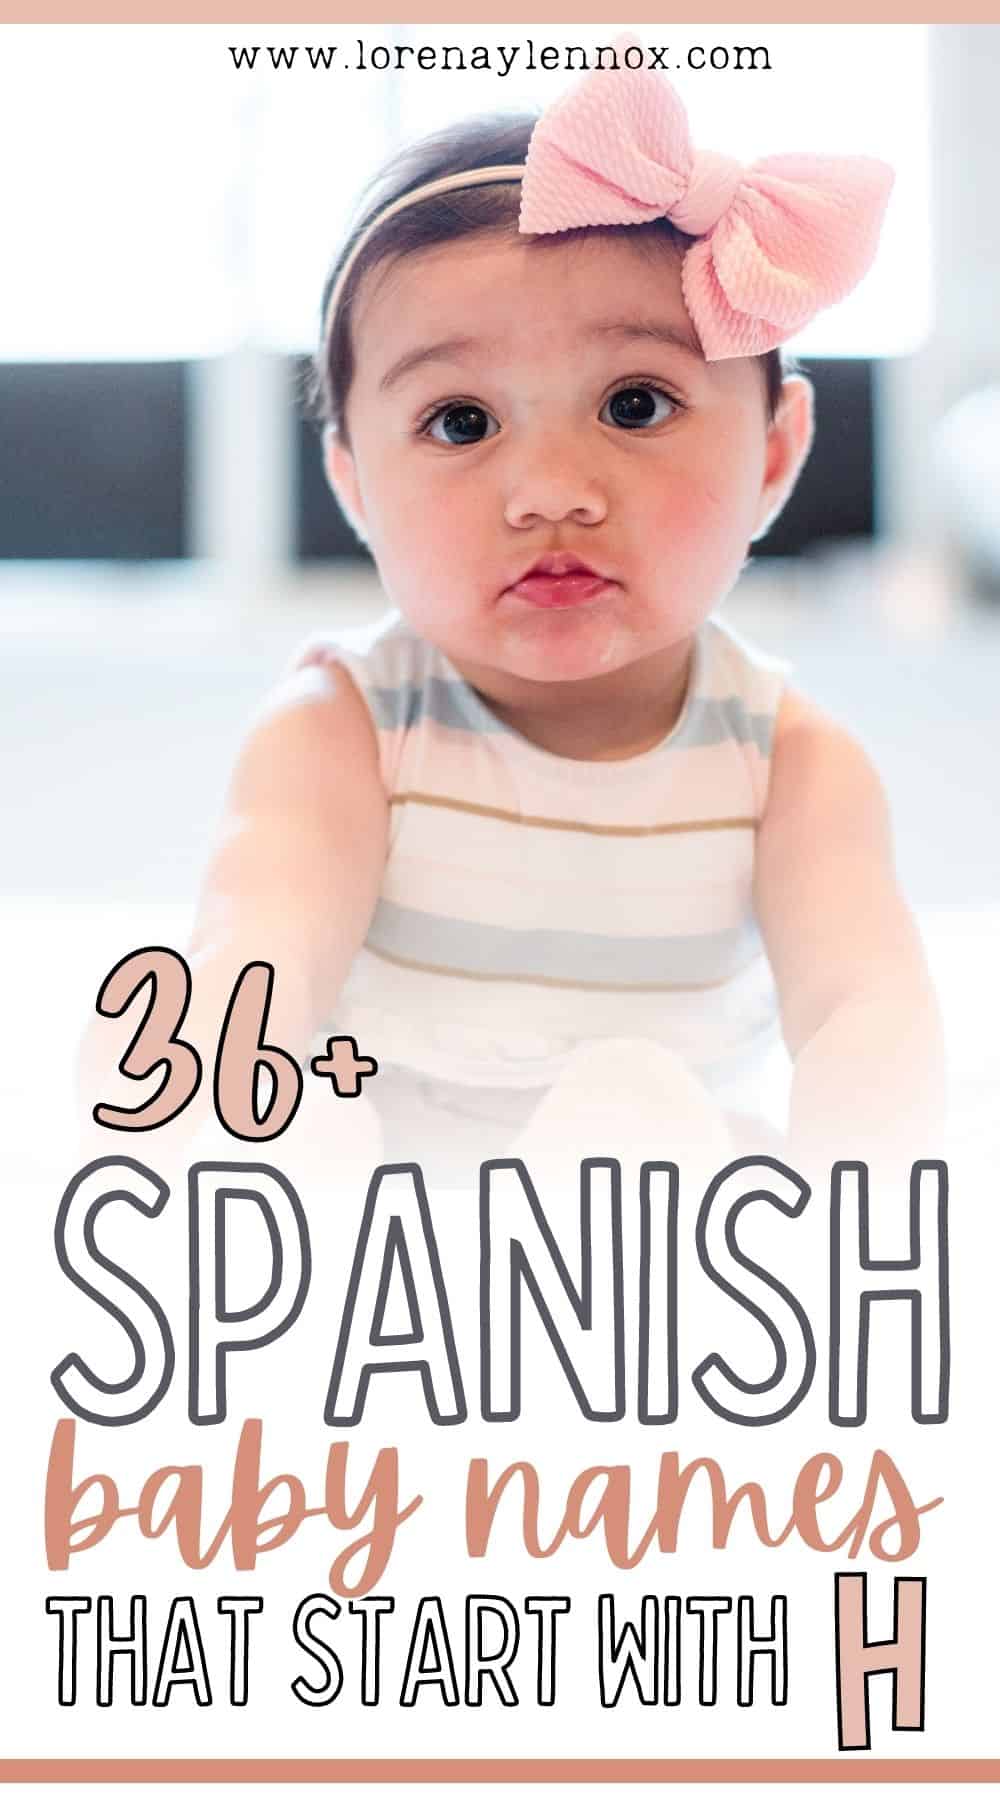 Spanish Names that start with H